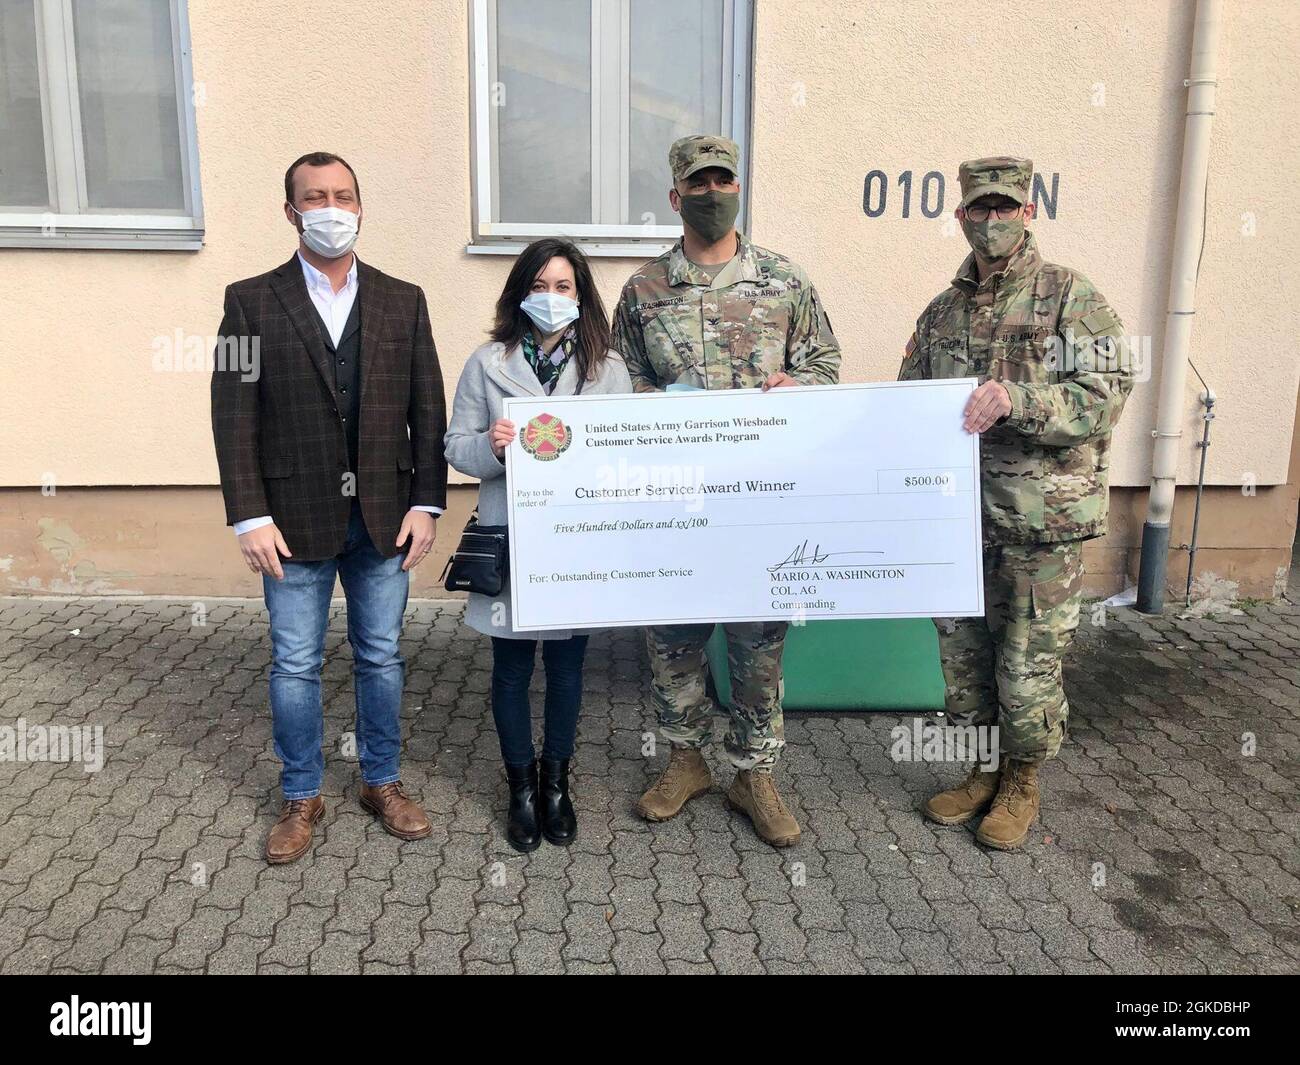 WIESBADEN, Germany -- Julie A. Kelly, education services specialist, receives her check from Col. Mario Washington, garrison commander, Command Sgt. Maj. Christopher Truchon and Scott Mowry, deputy to the garrison commander, for outstanding customer service at U.S. Army Garrison Wiesbaden March 19, 2021. Stock Photo